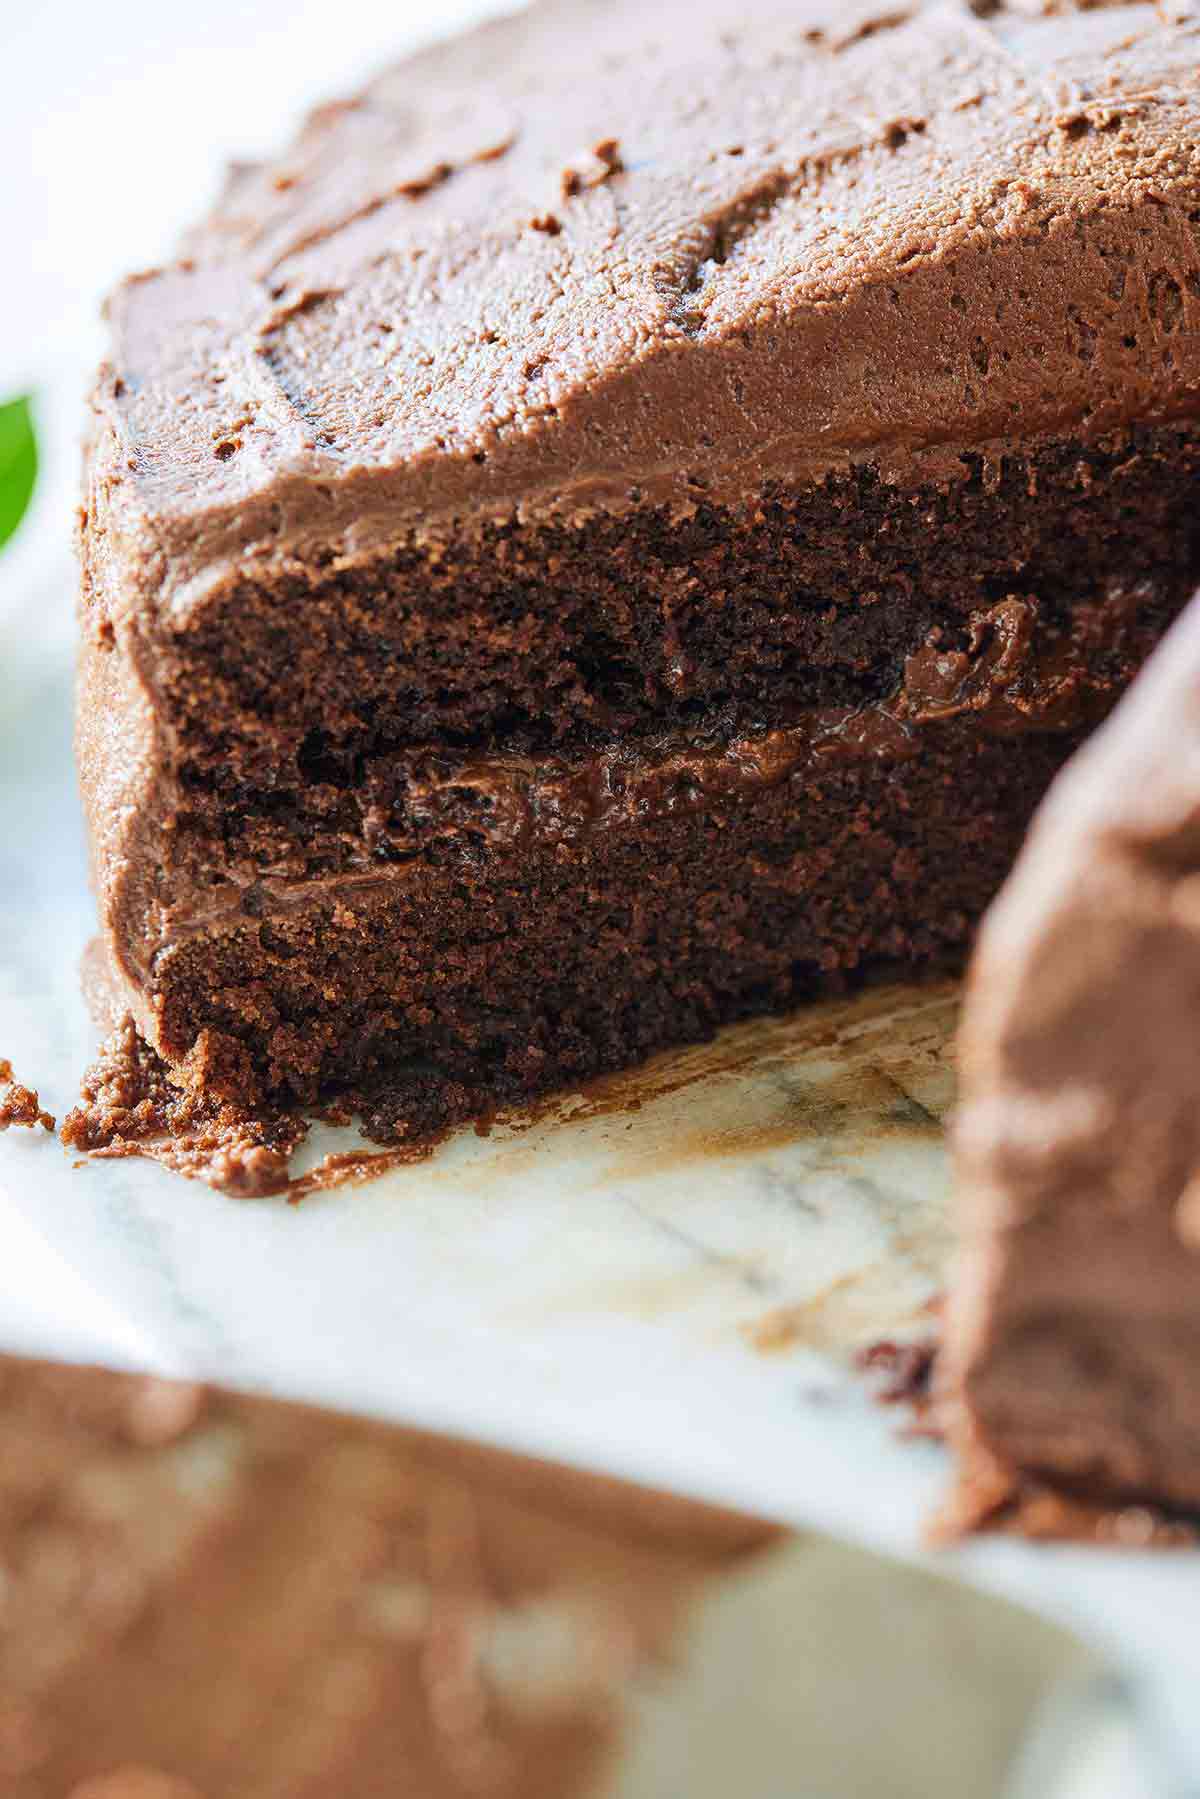 A cake with a slice taken out, focusing on the interior of the vegan chocolate cake.